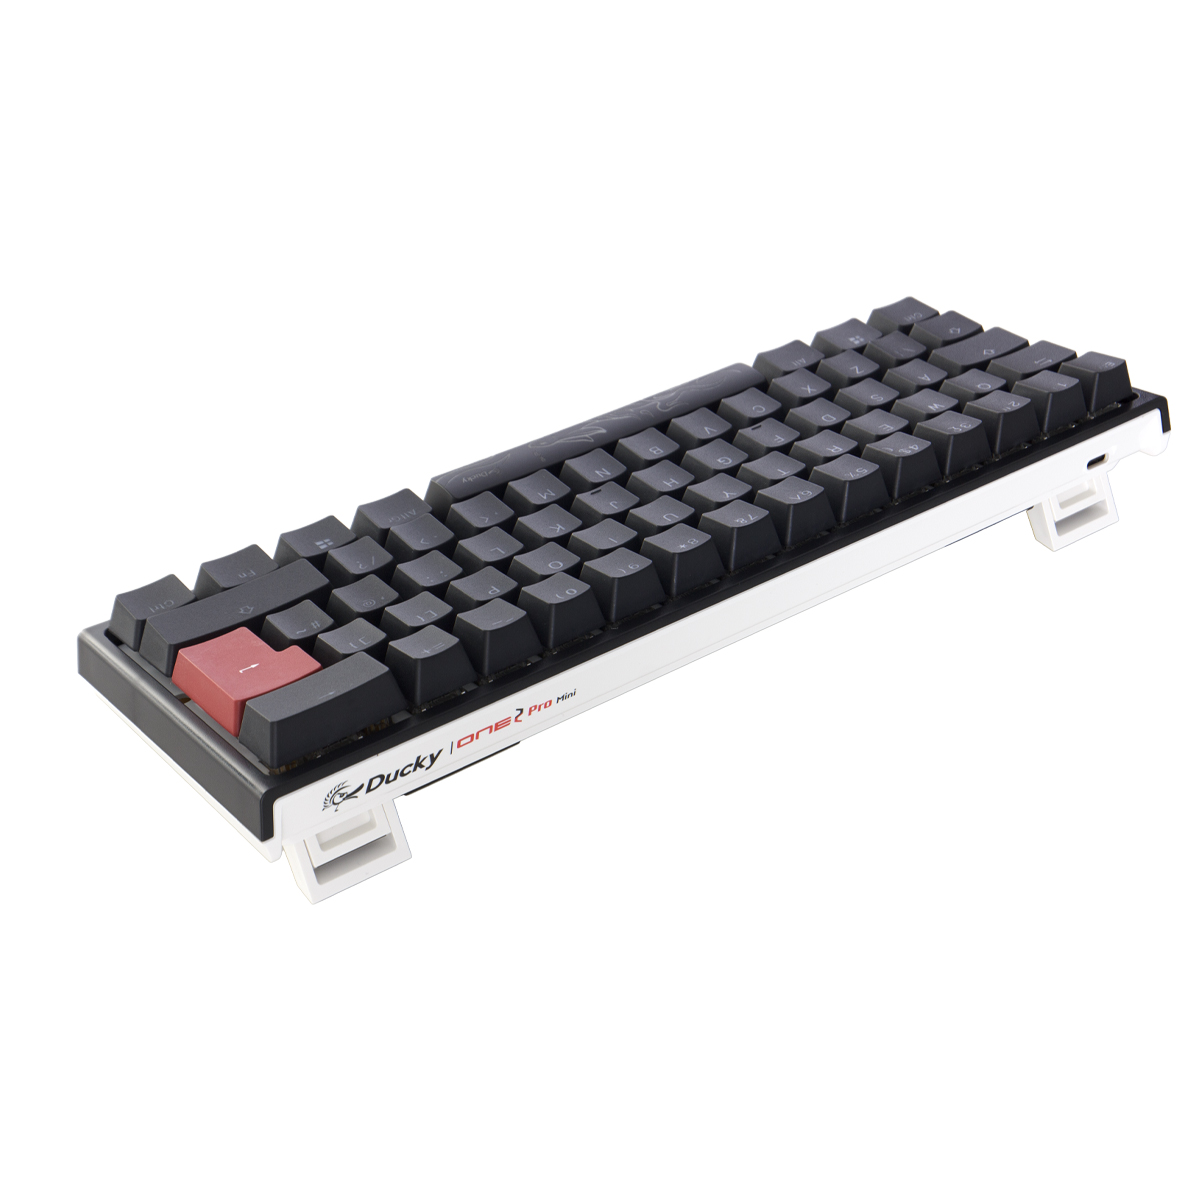 Ducky - Ducky One 2 Pro Mini 60% Mechanical Gaming Keyboard Black MX Cherry Silent Red Switch - UK Layout